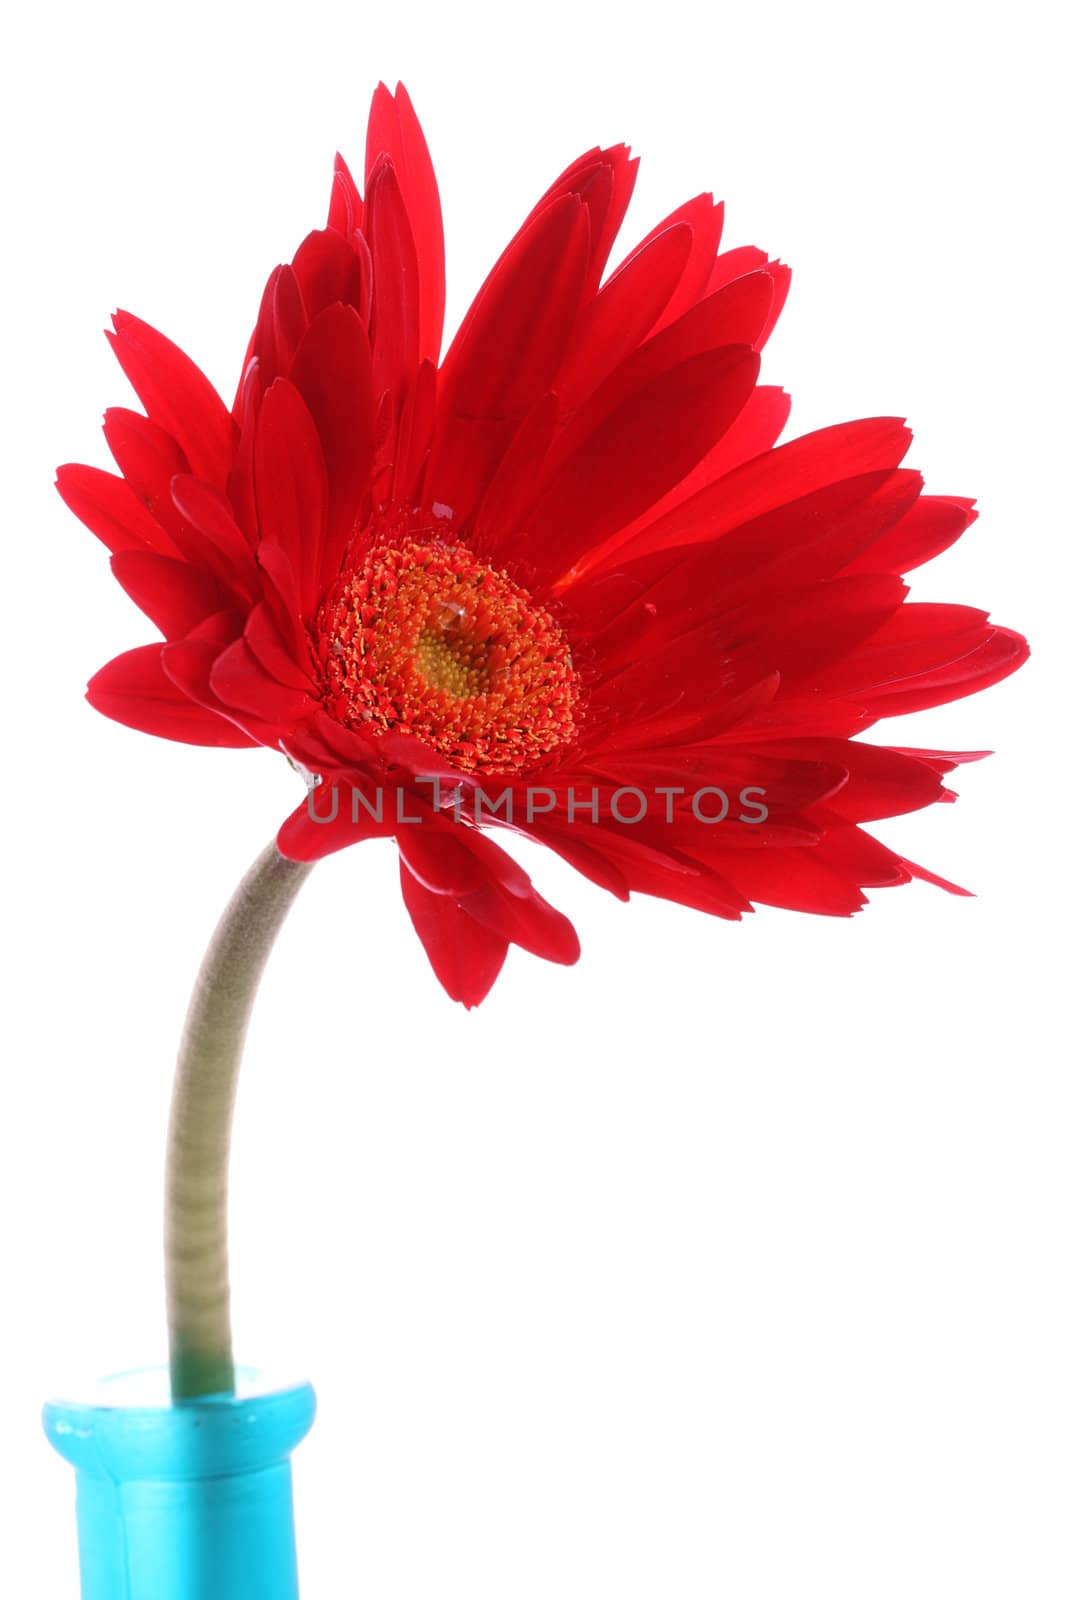 Red gerbera in a blue glass round vase